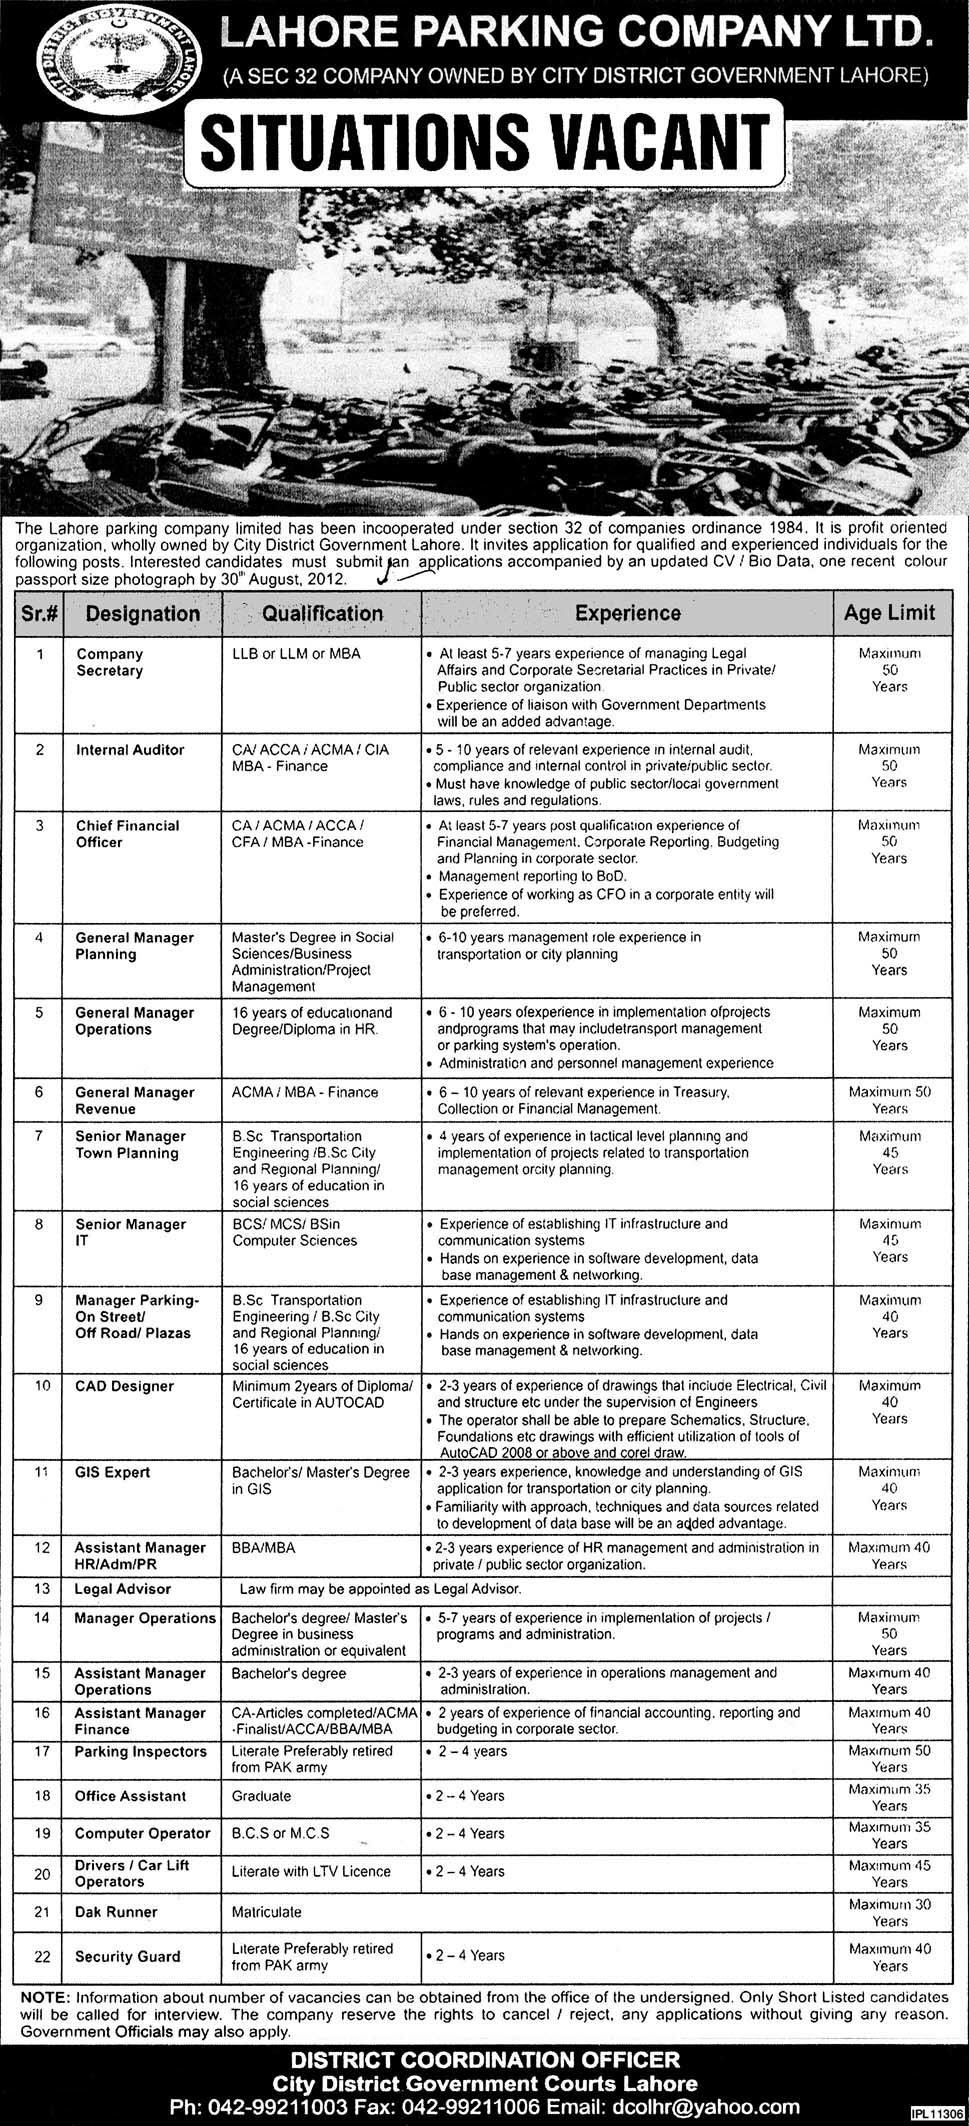 Lahore Parking Company Limited Requires Management, Finance, IT and Office Support Staff (Government job)